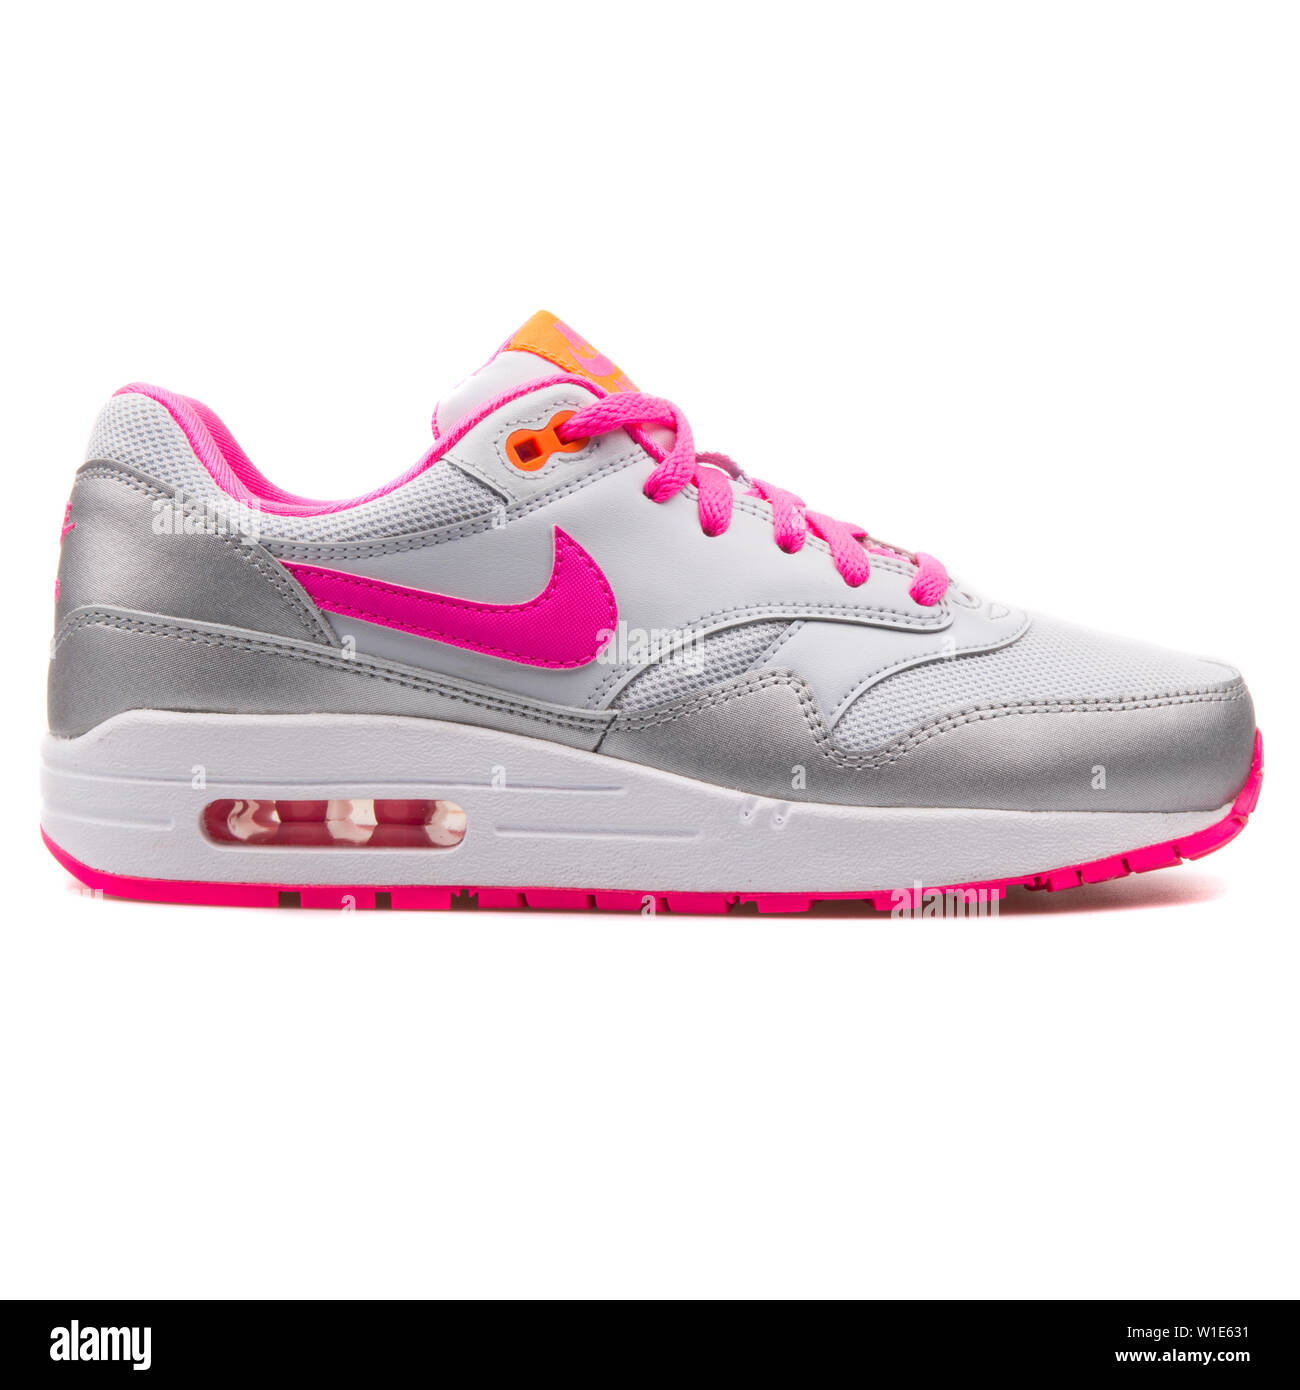 VIENNA, AUSTRIA - AUGUST 25, 2017: Nike Air Max 1 silver and pink sneaker  on white background Stock Photo - Alamy